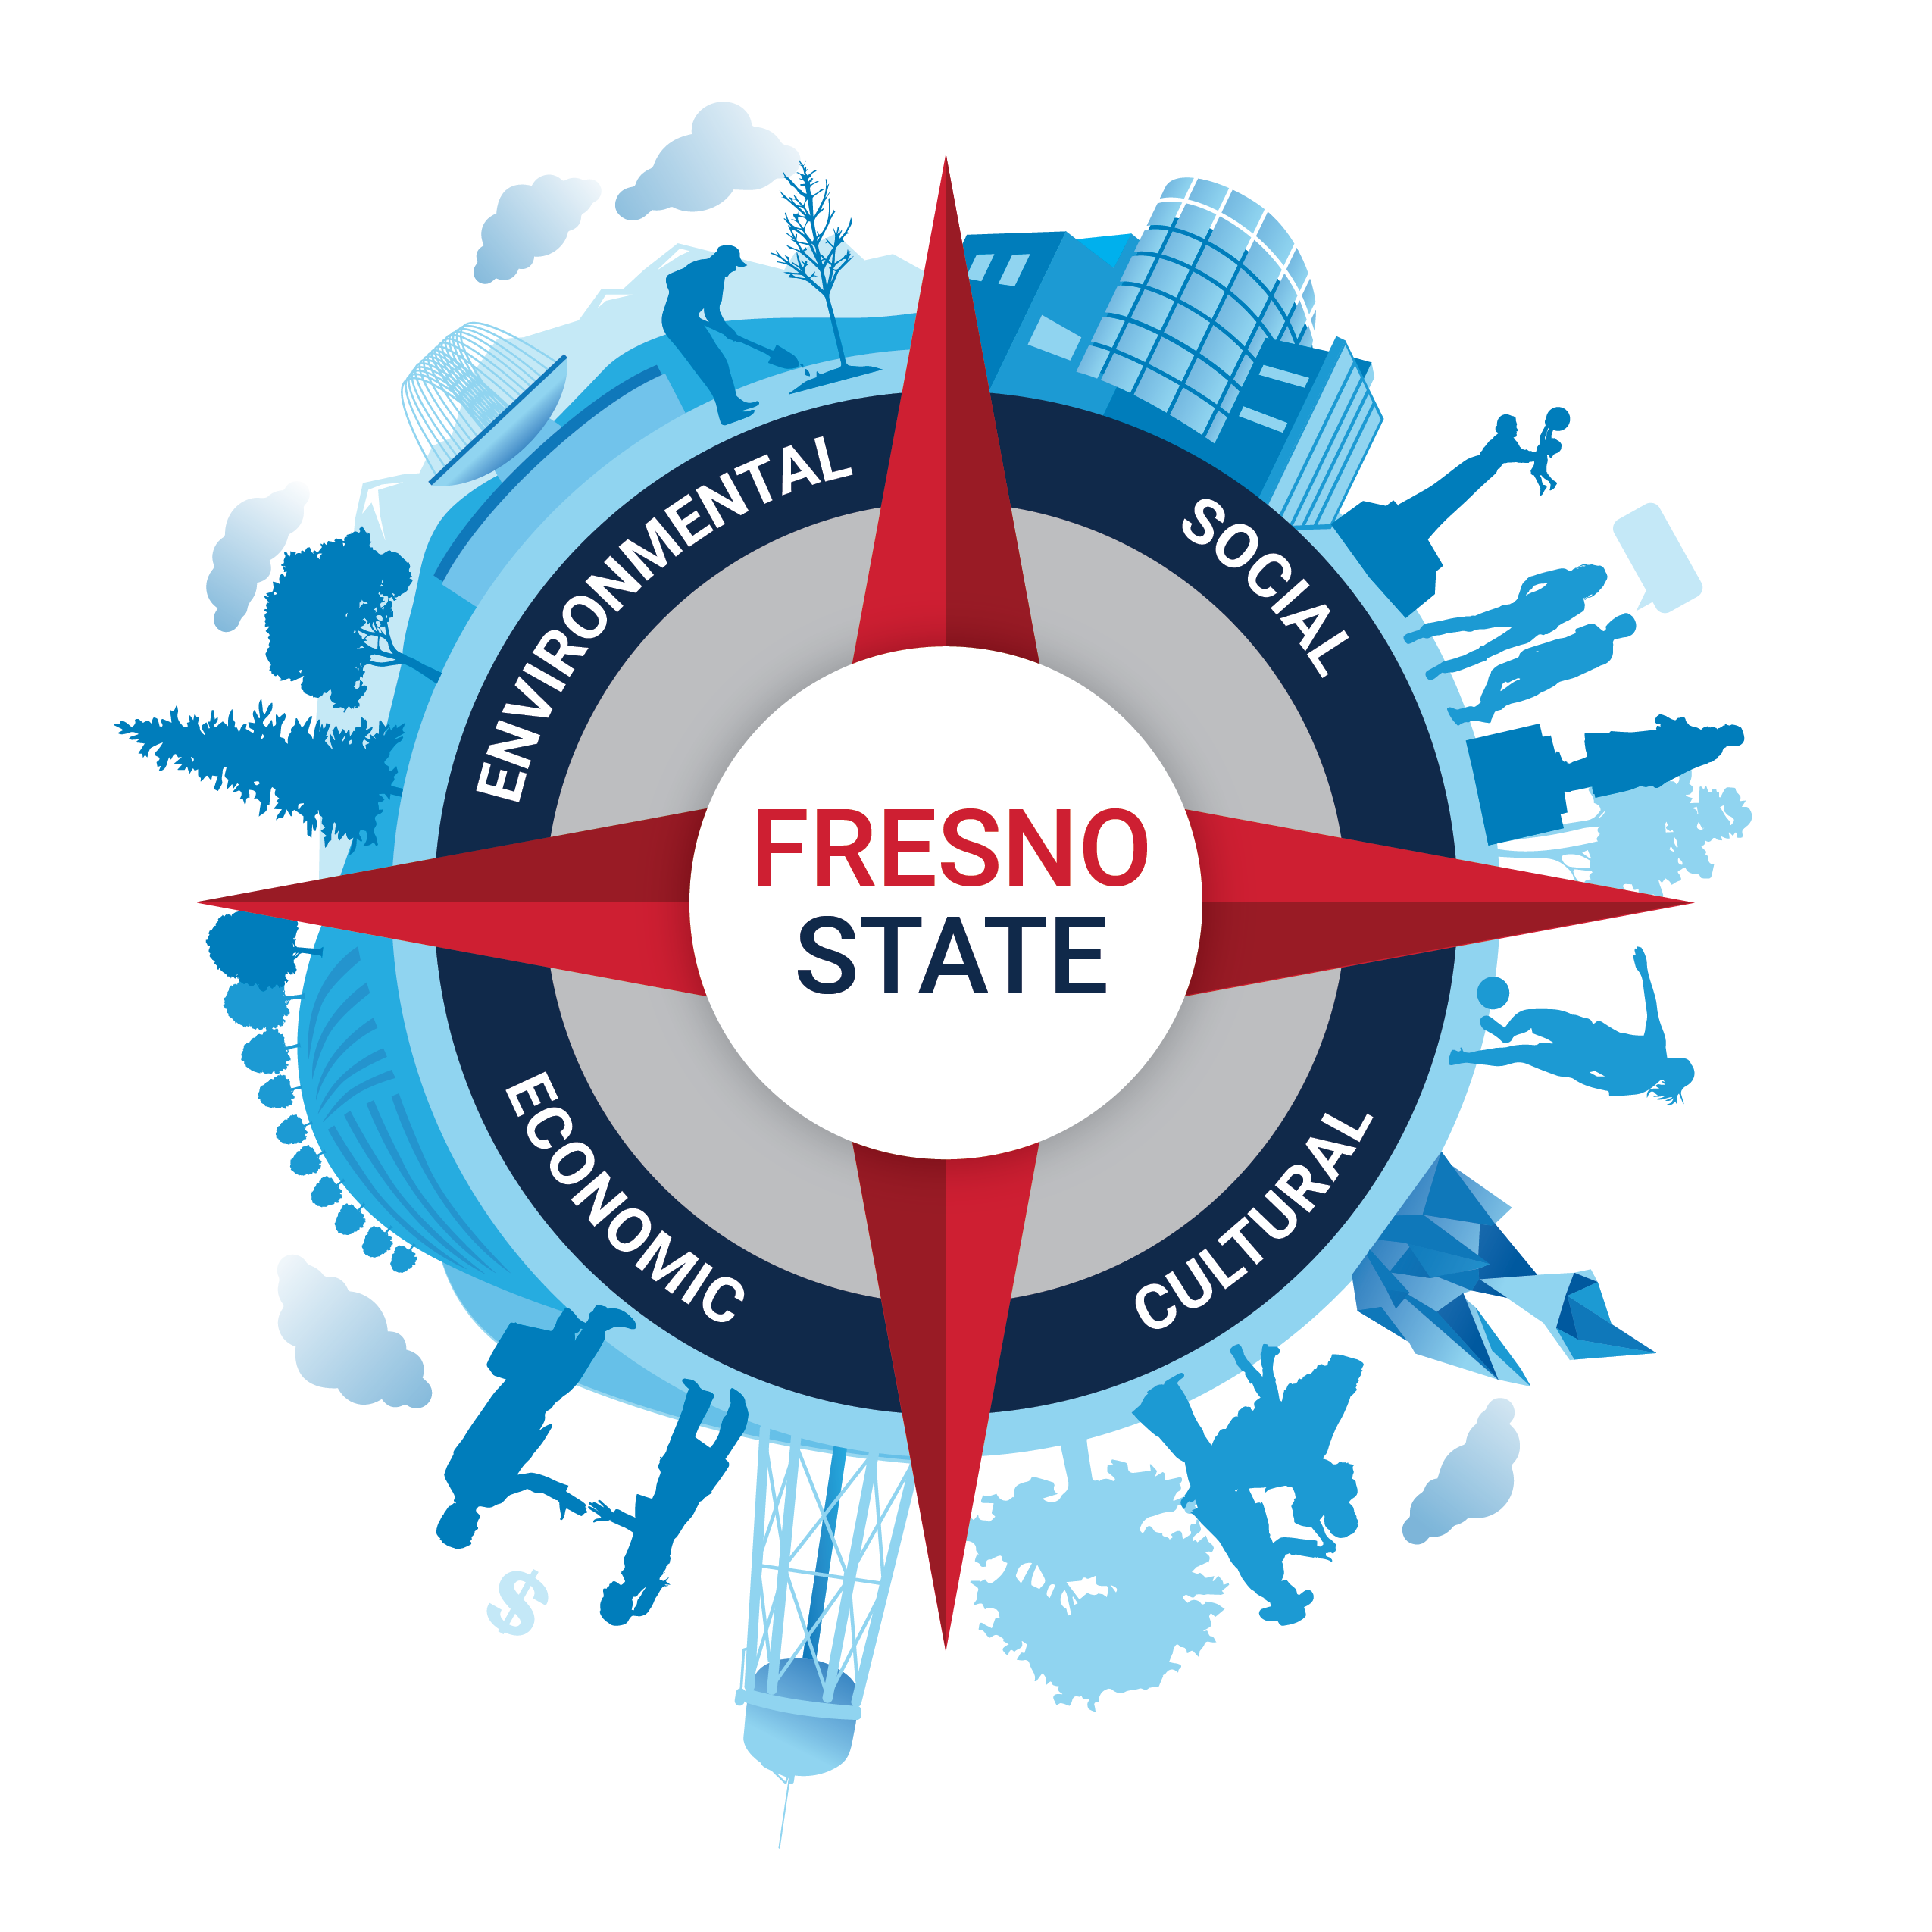 Fresno State Sustainability Compass Logo. This logo represents how sustainability can guide us to a clean, vibrant future and shows key images of Fresno State's campus.